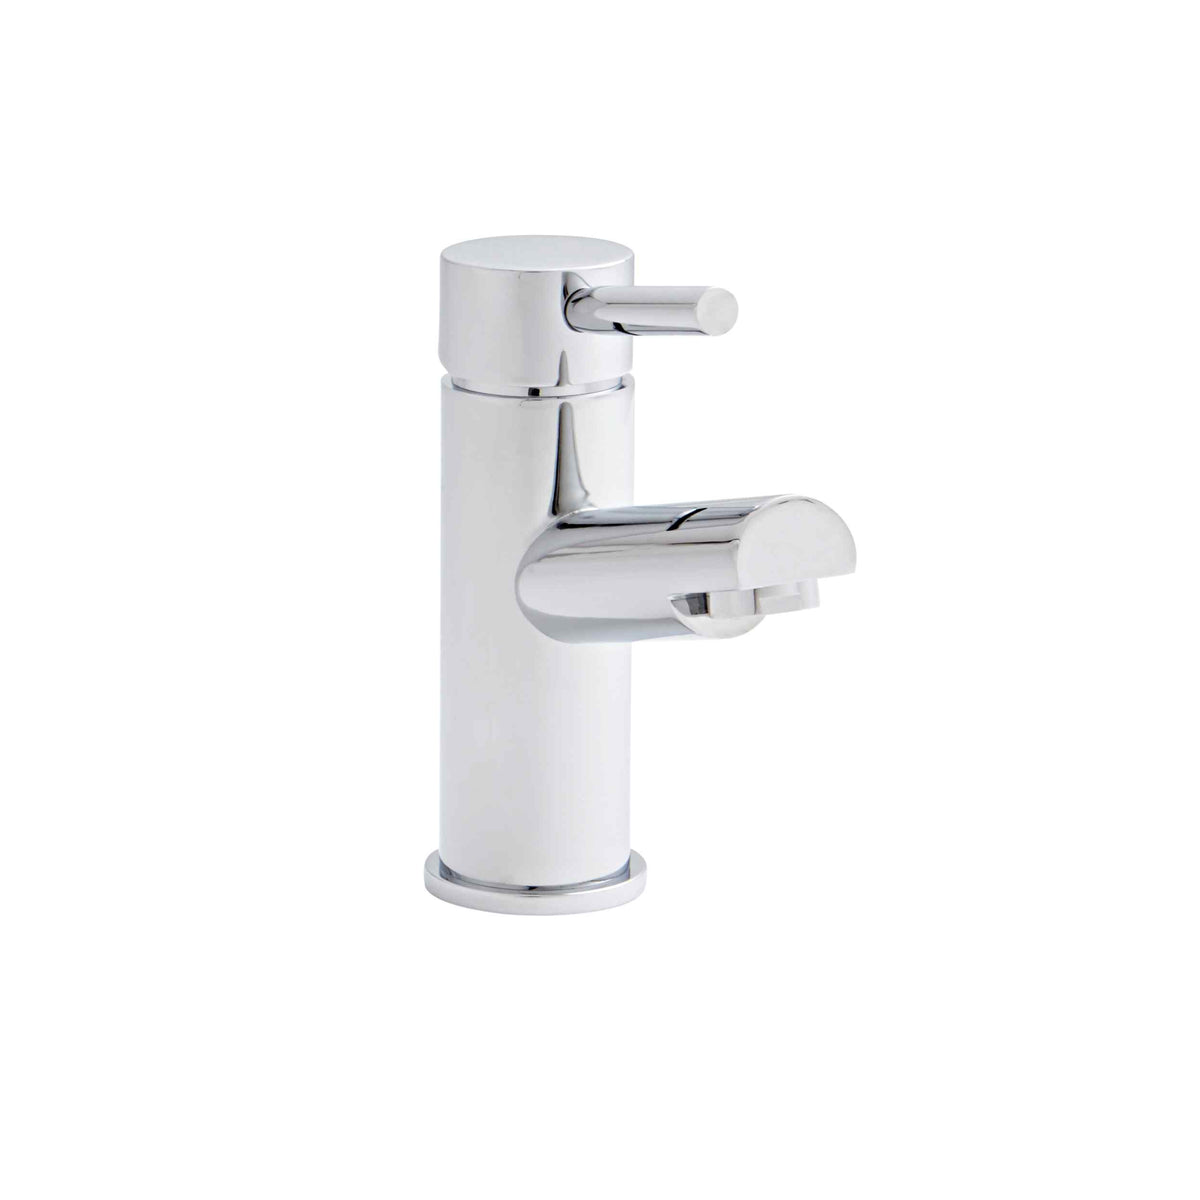 Kartell UK Plan Mono Basin Mixer Tap with Click Waste